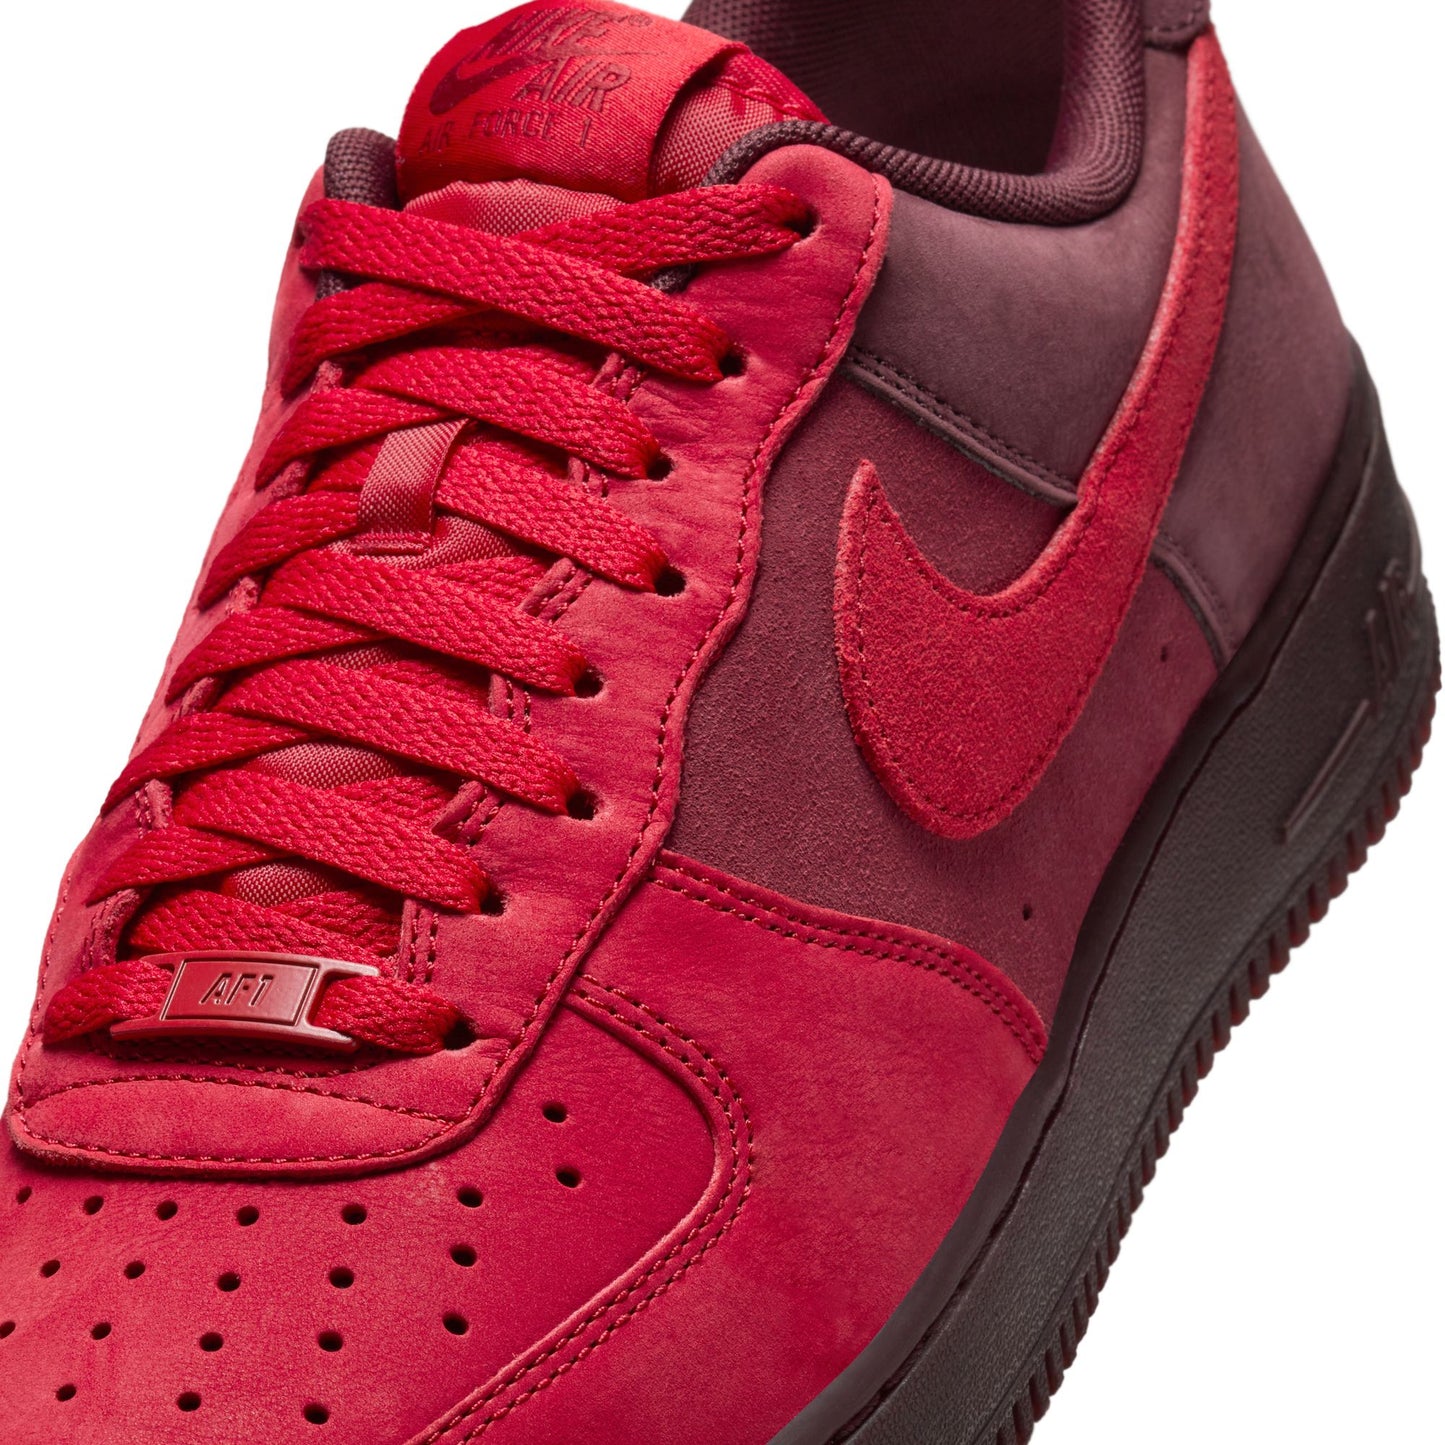 Nike Air Force 1 '07 “Layers of Love” - FZ4033-657